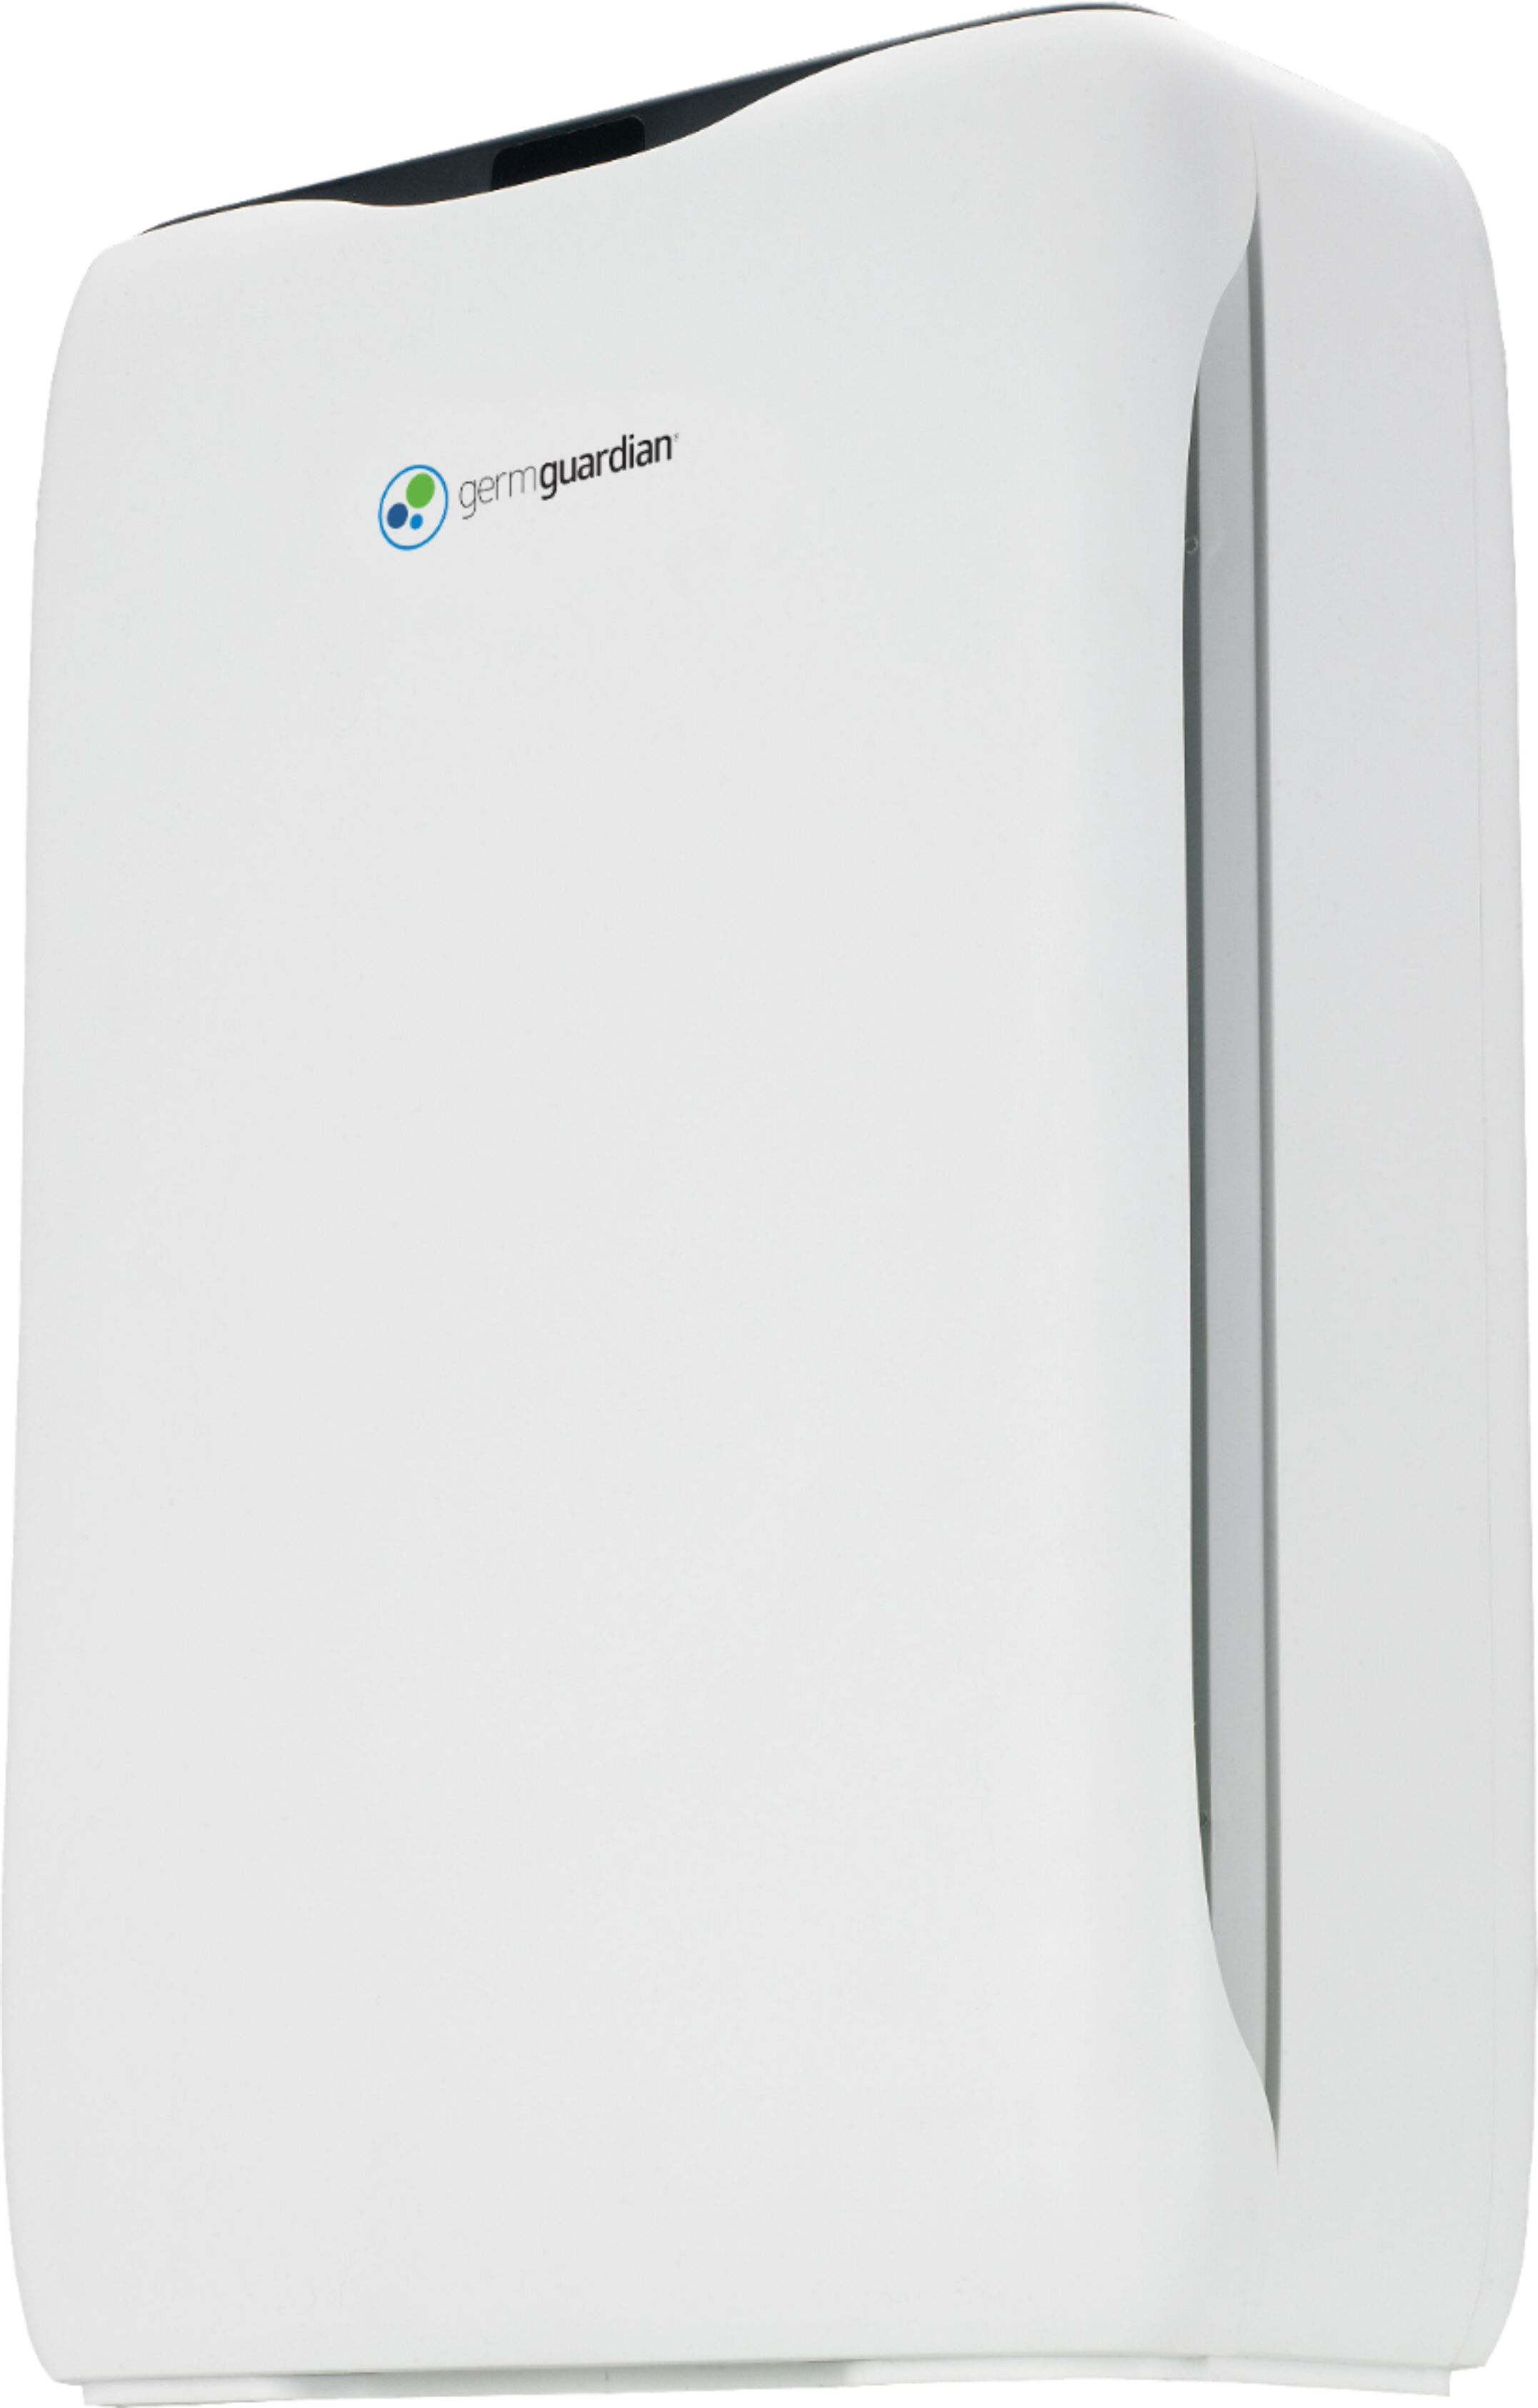 Angle View: GermGuardian - 151 Sq. Ft Console Air Purifier - White